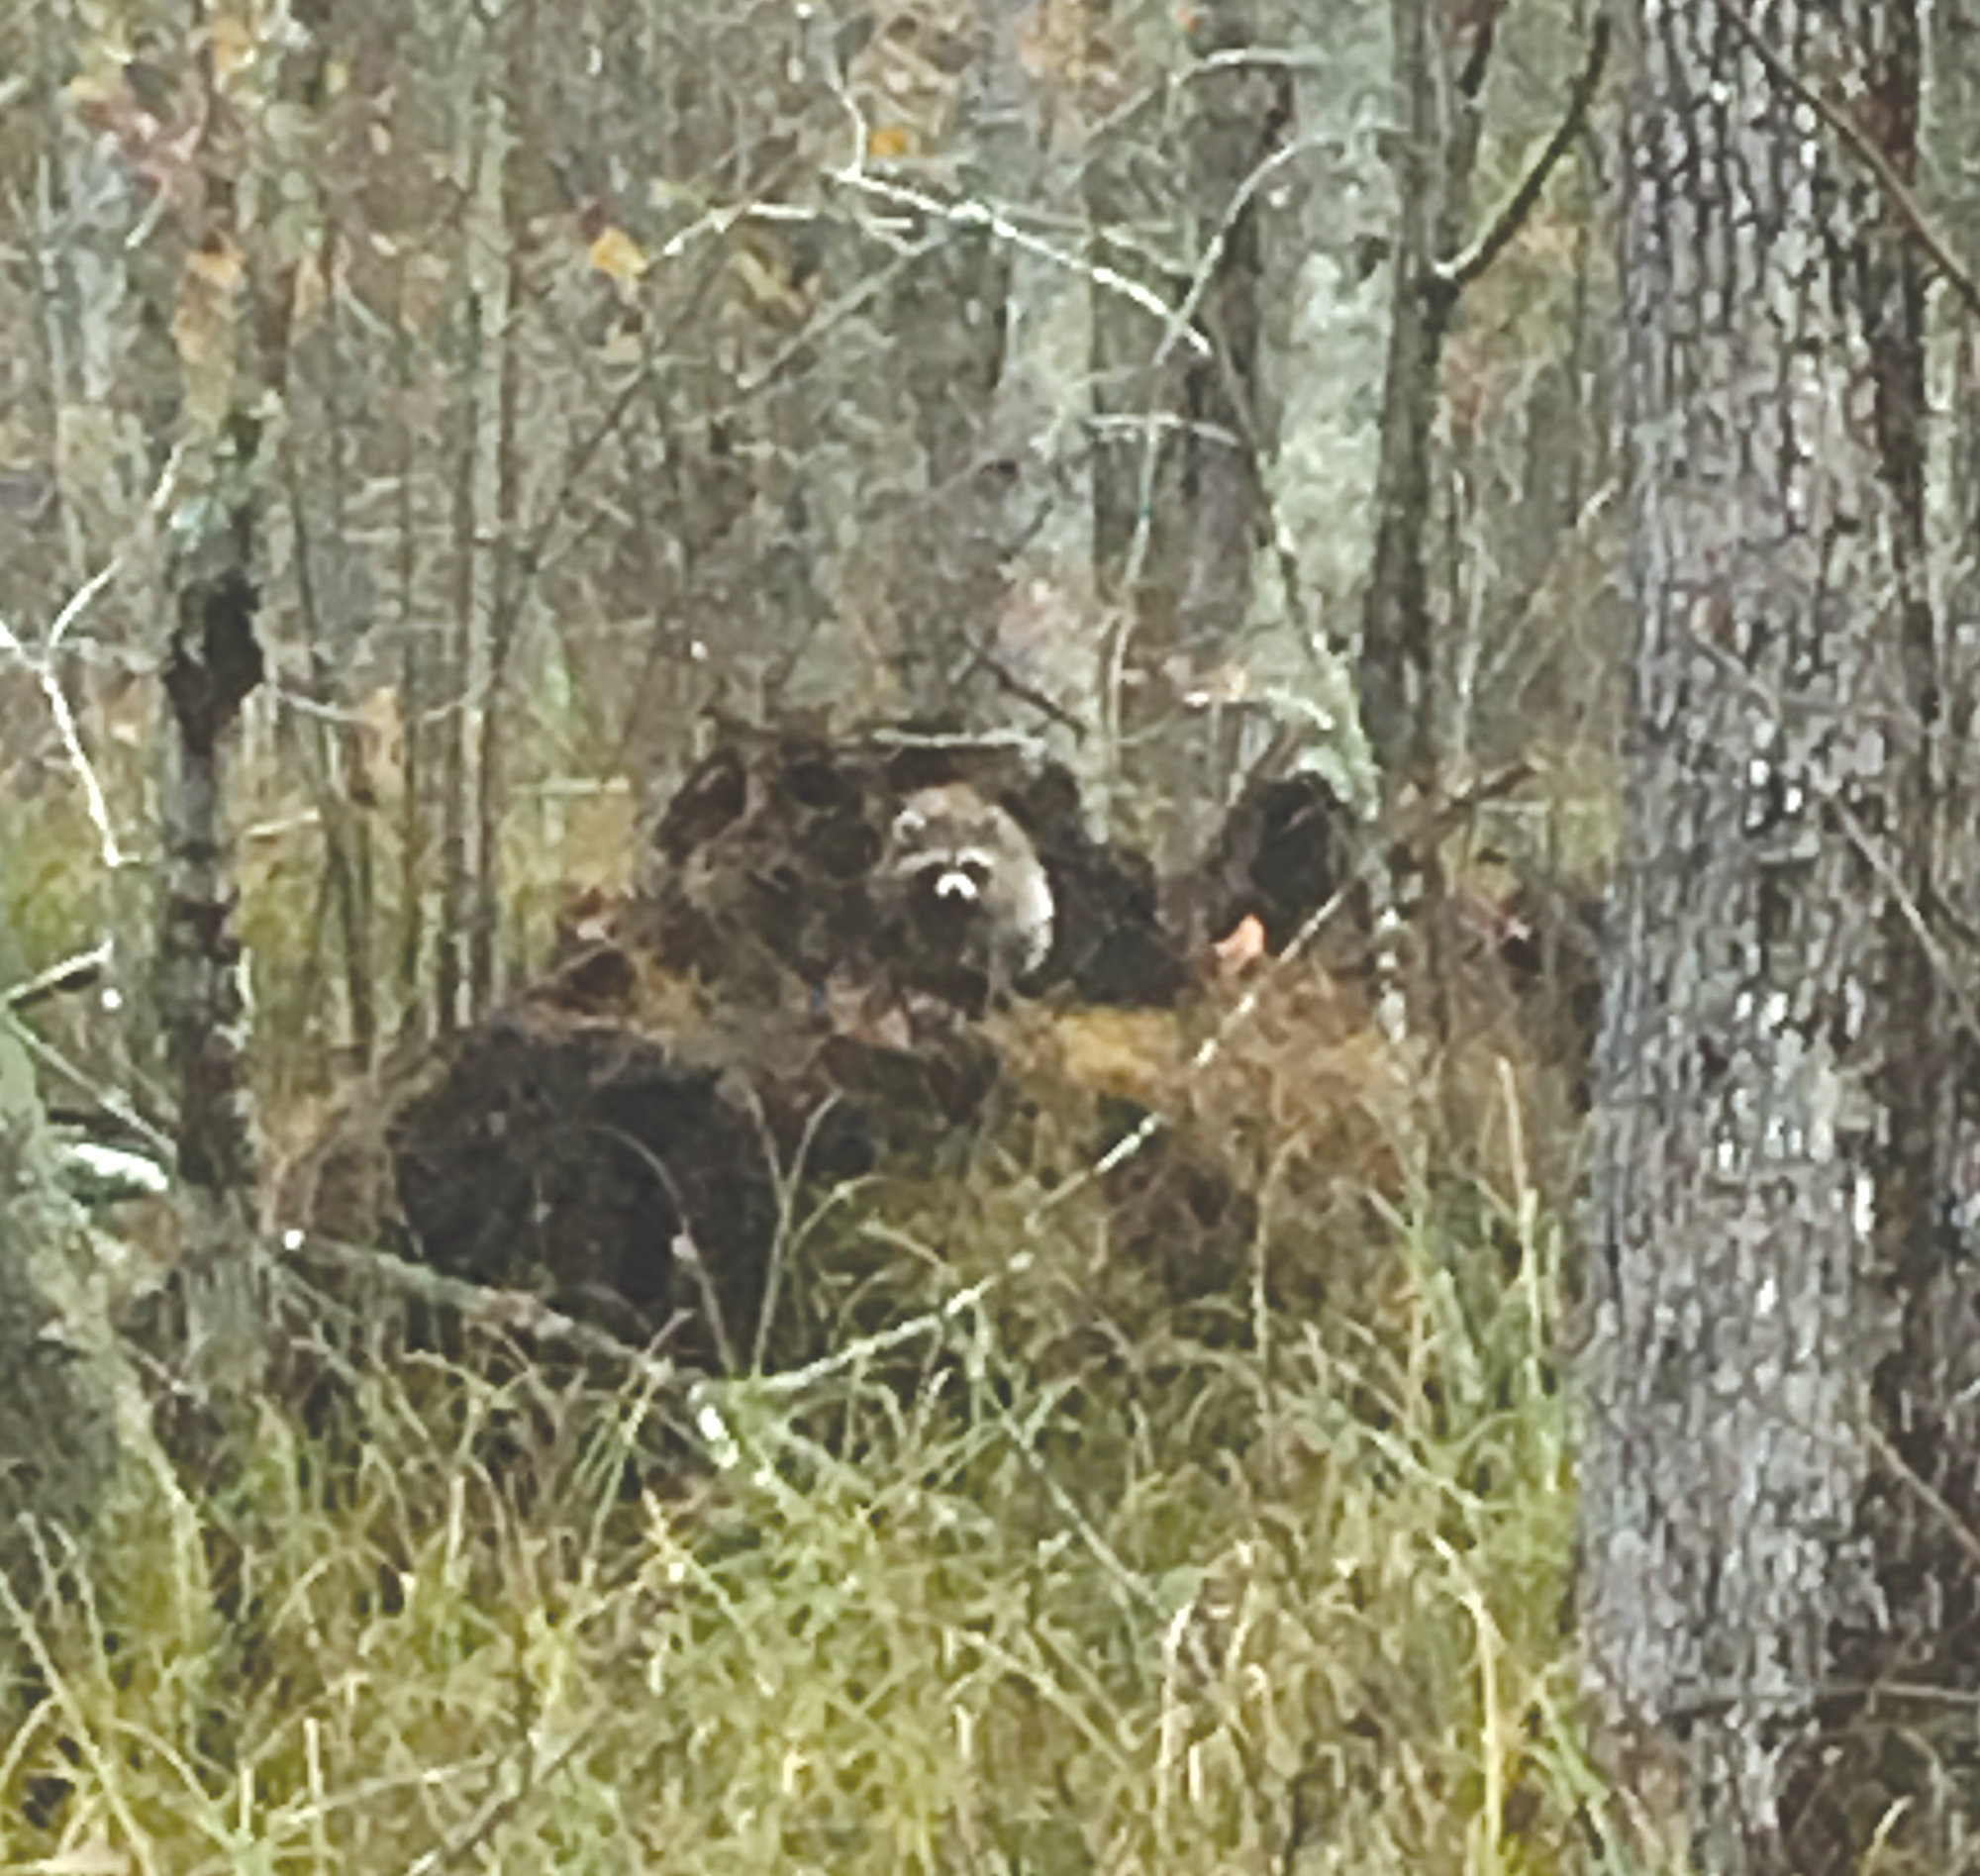 DAN GEDDINGS / SPECIAL TO THE SUMTER ITEM  Wetland habitats benefit a variety of wildlife such as this curious raccoon.